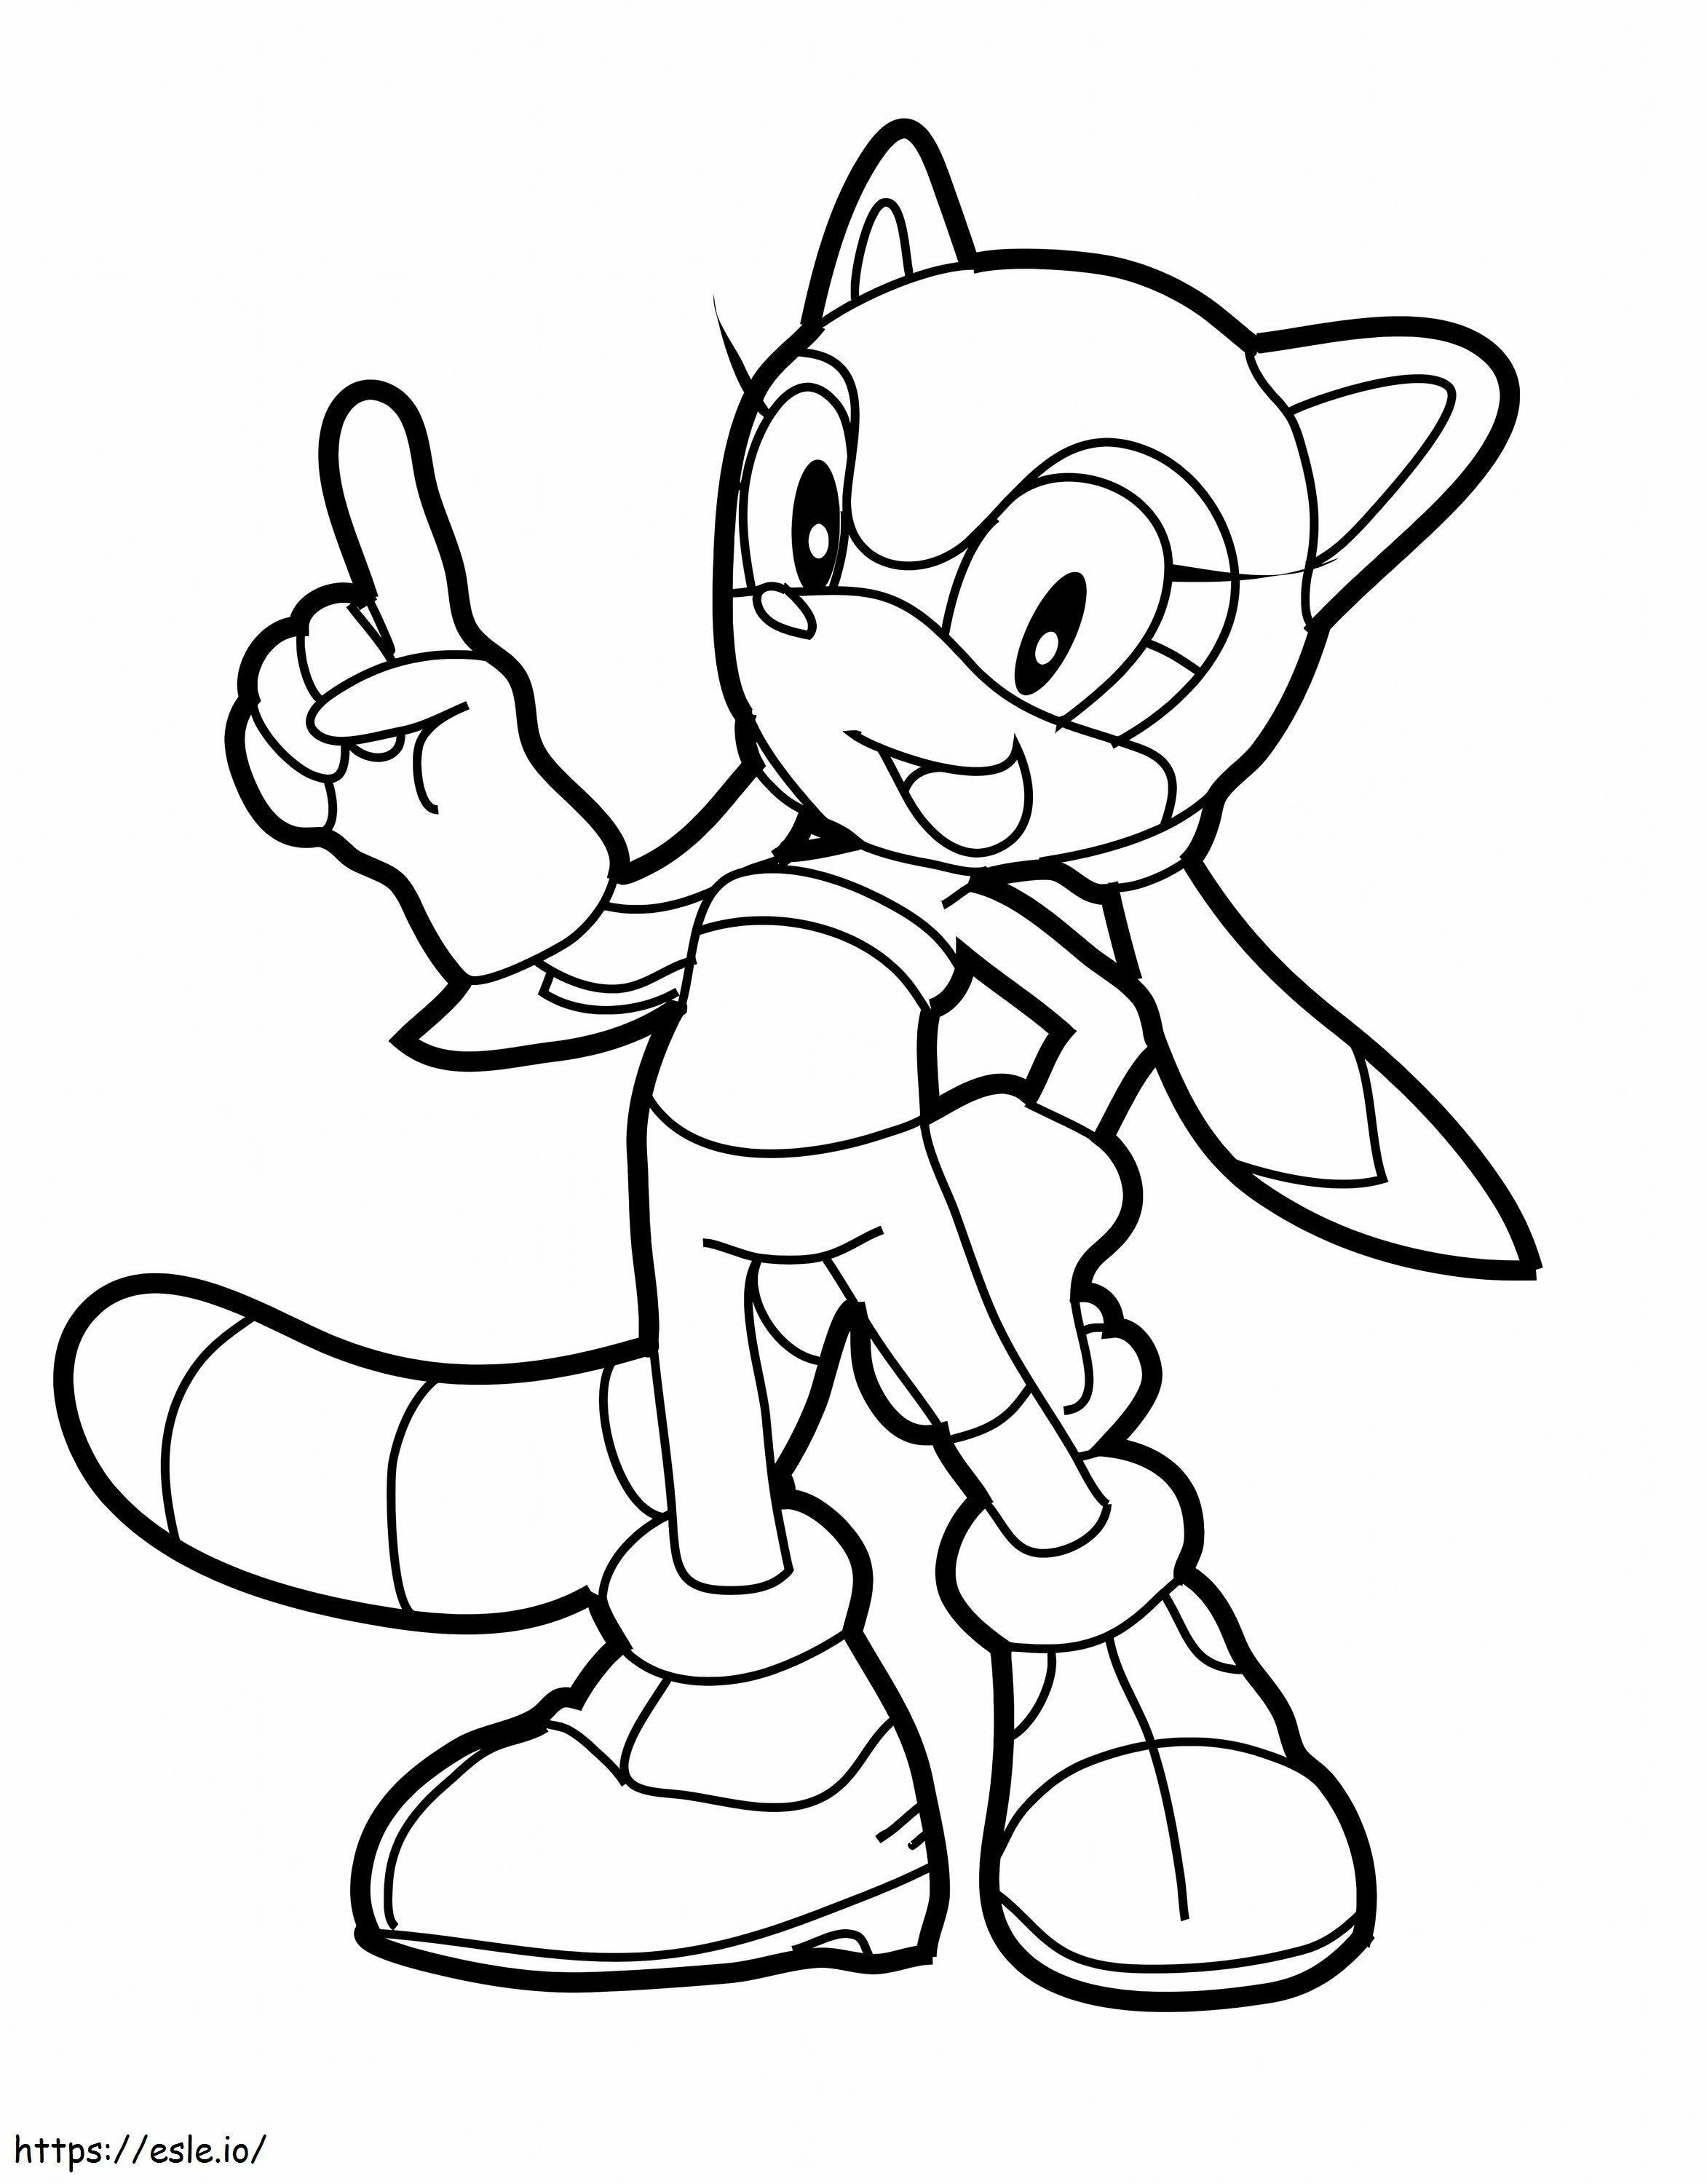 1573260460 Metal Sonic coloring page